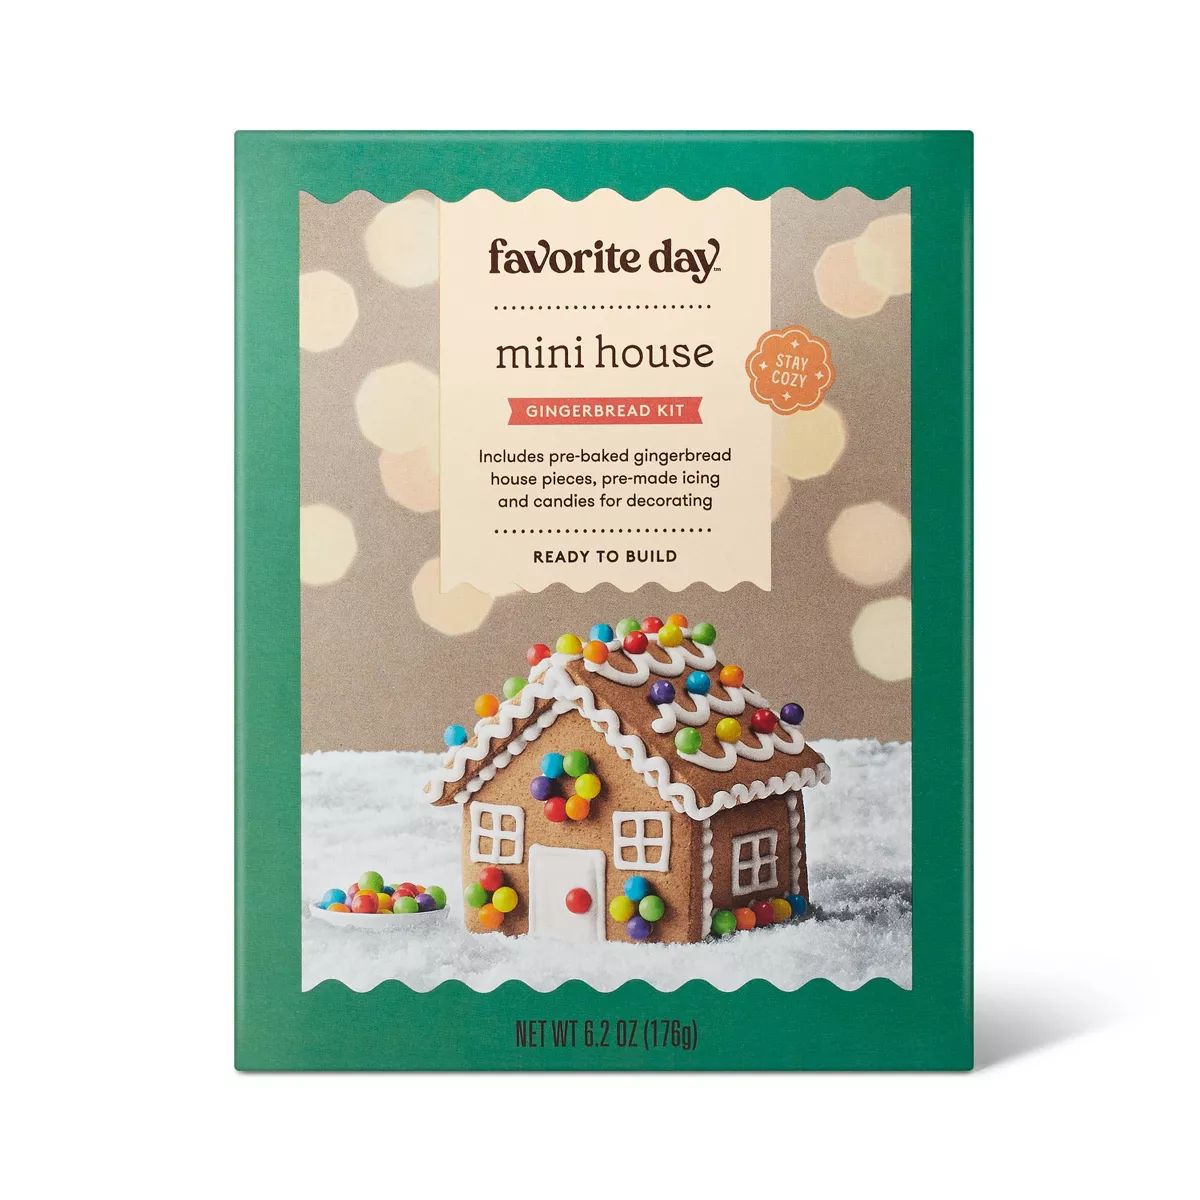 Holiday Mini House Gingerbread House Kit - 6.2oz - Favorite Day™ | Target